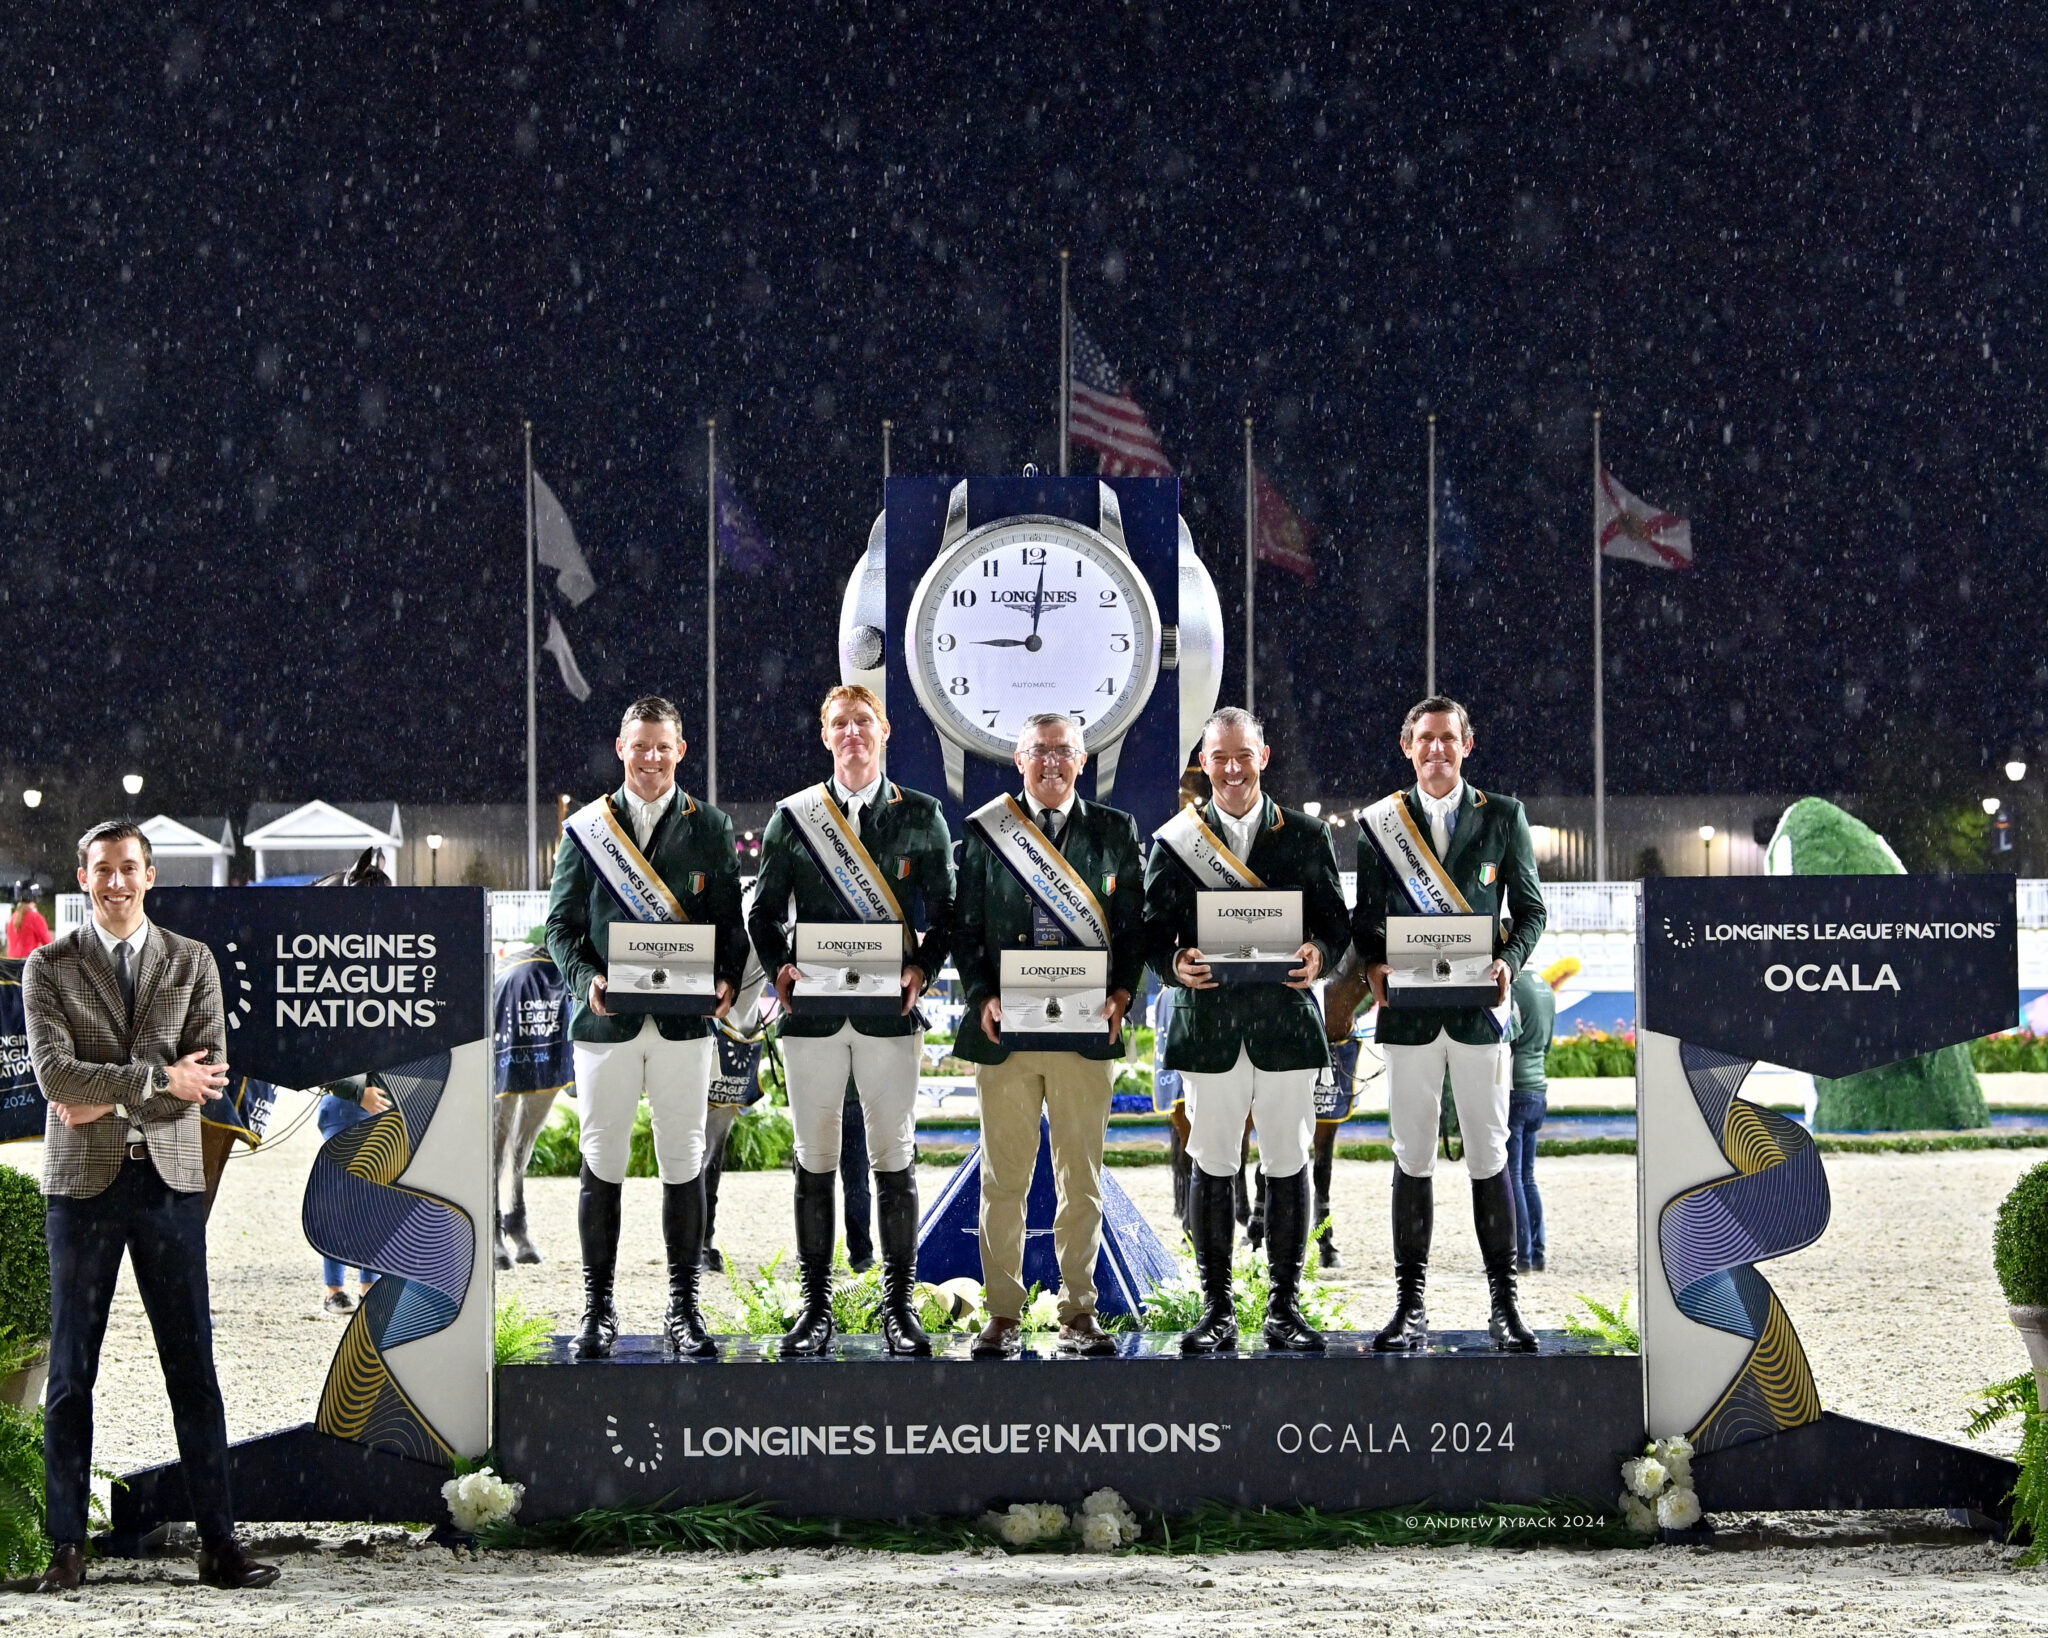 Ireland brings the heat to Florida, winning the Longines League of Nations!